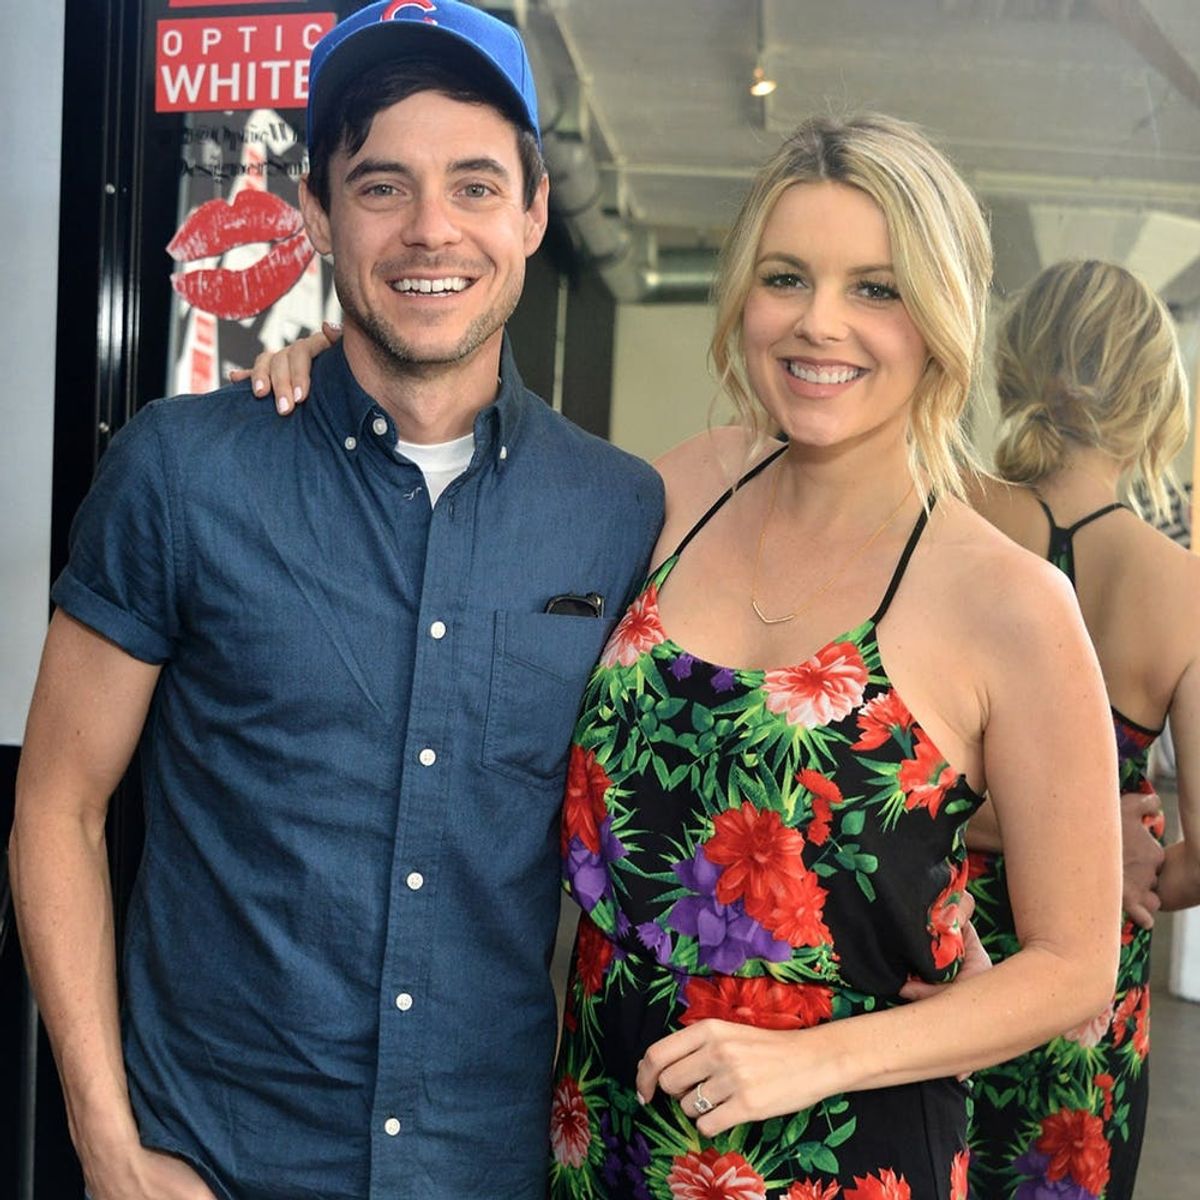 Ali Fedotowsky Just Revealed Her Baby’s Gender With the Sweetest Announcement